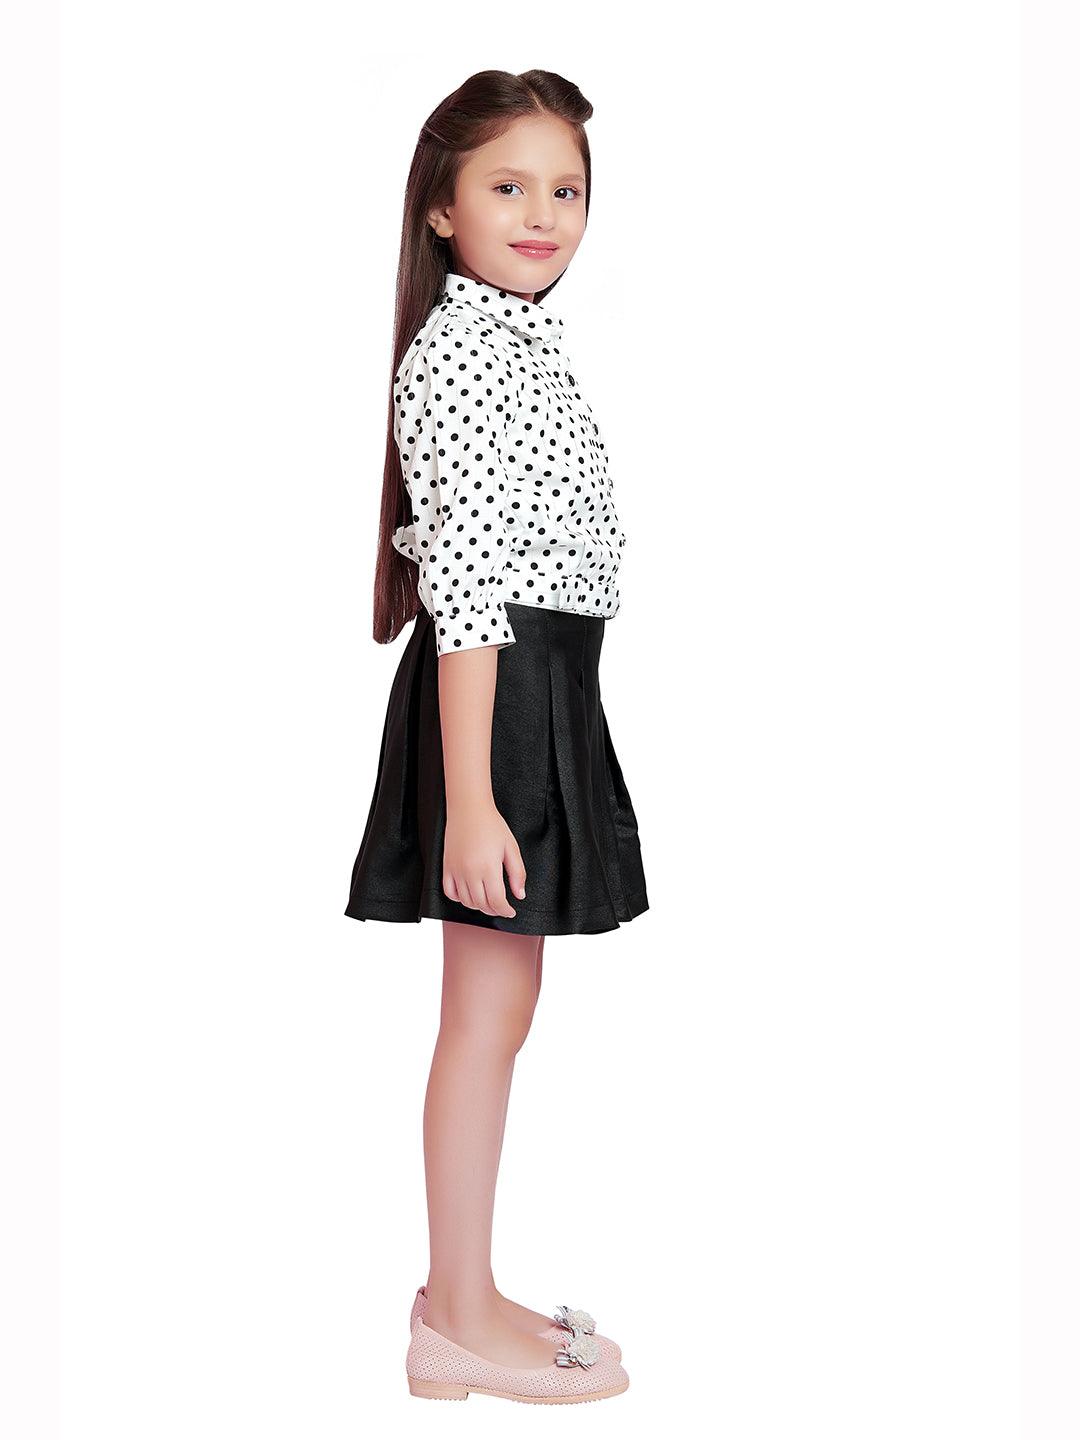 Black Coloured Skirt Top Set - 2121 Black - TINY BABY INDIA shop.tinybaby.in